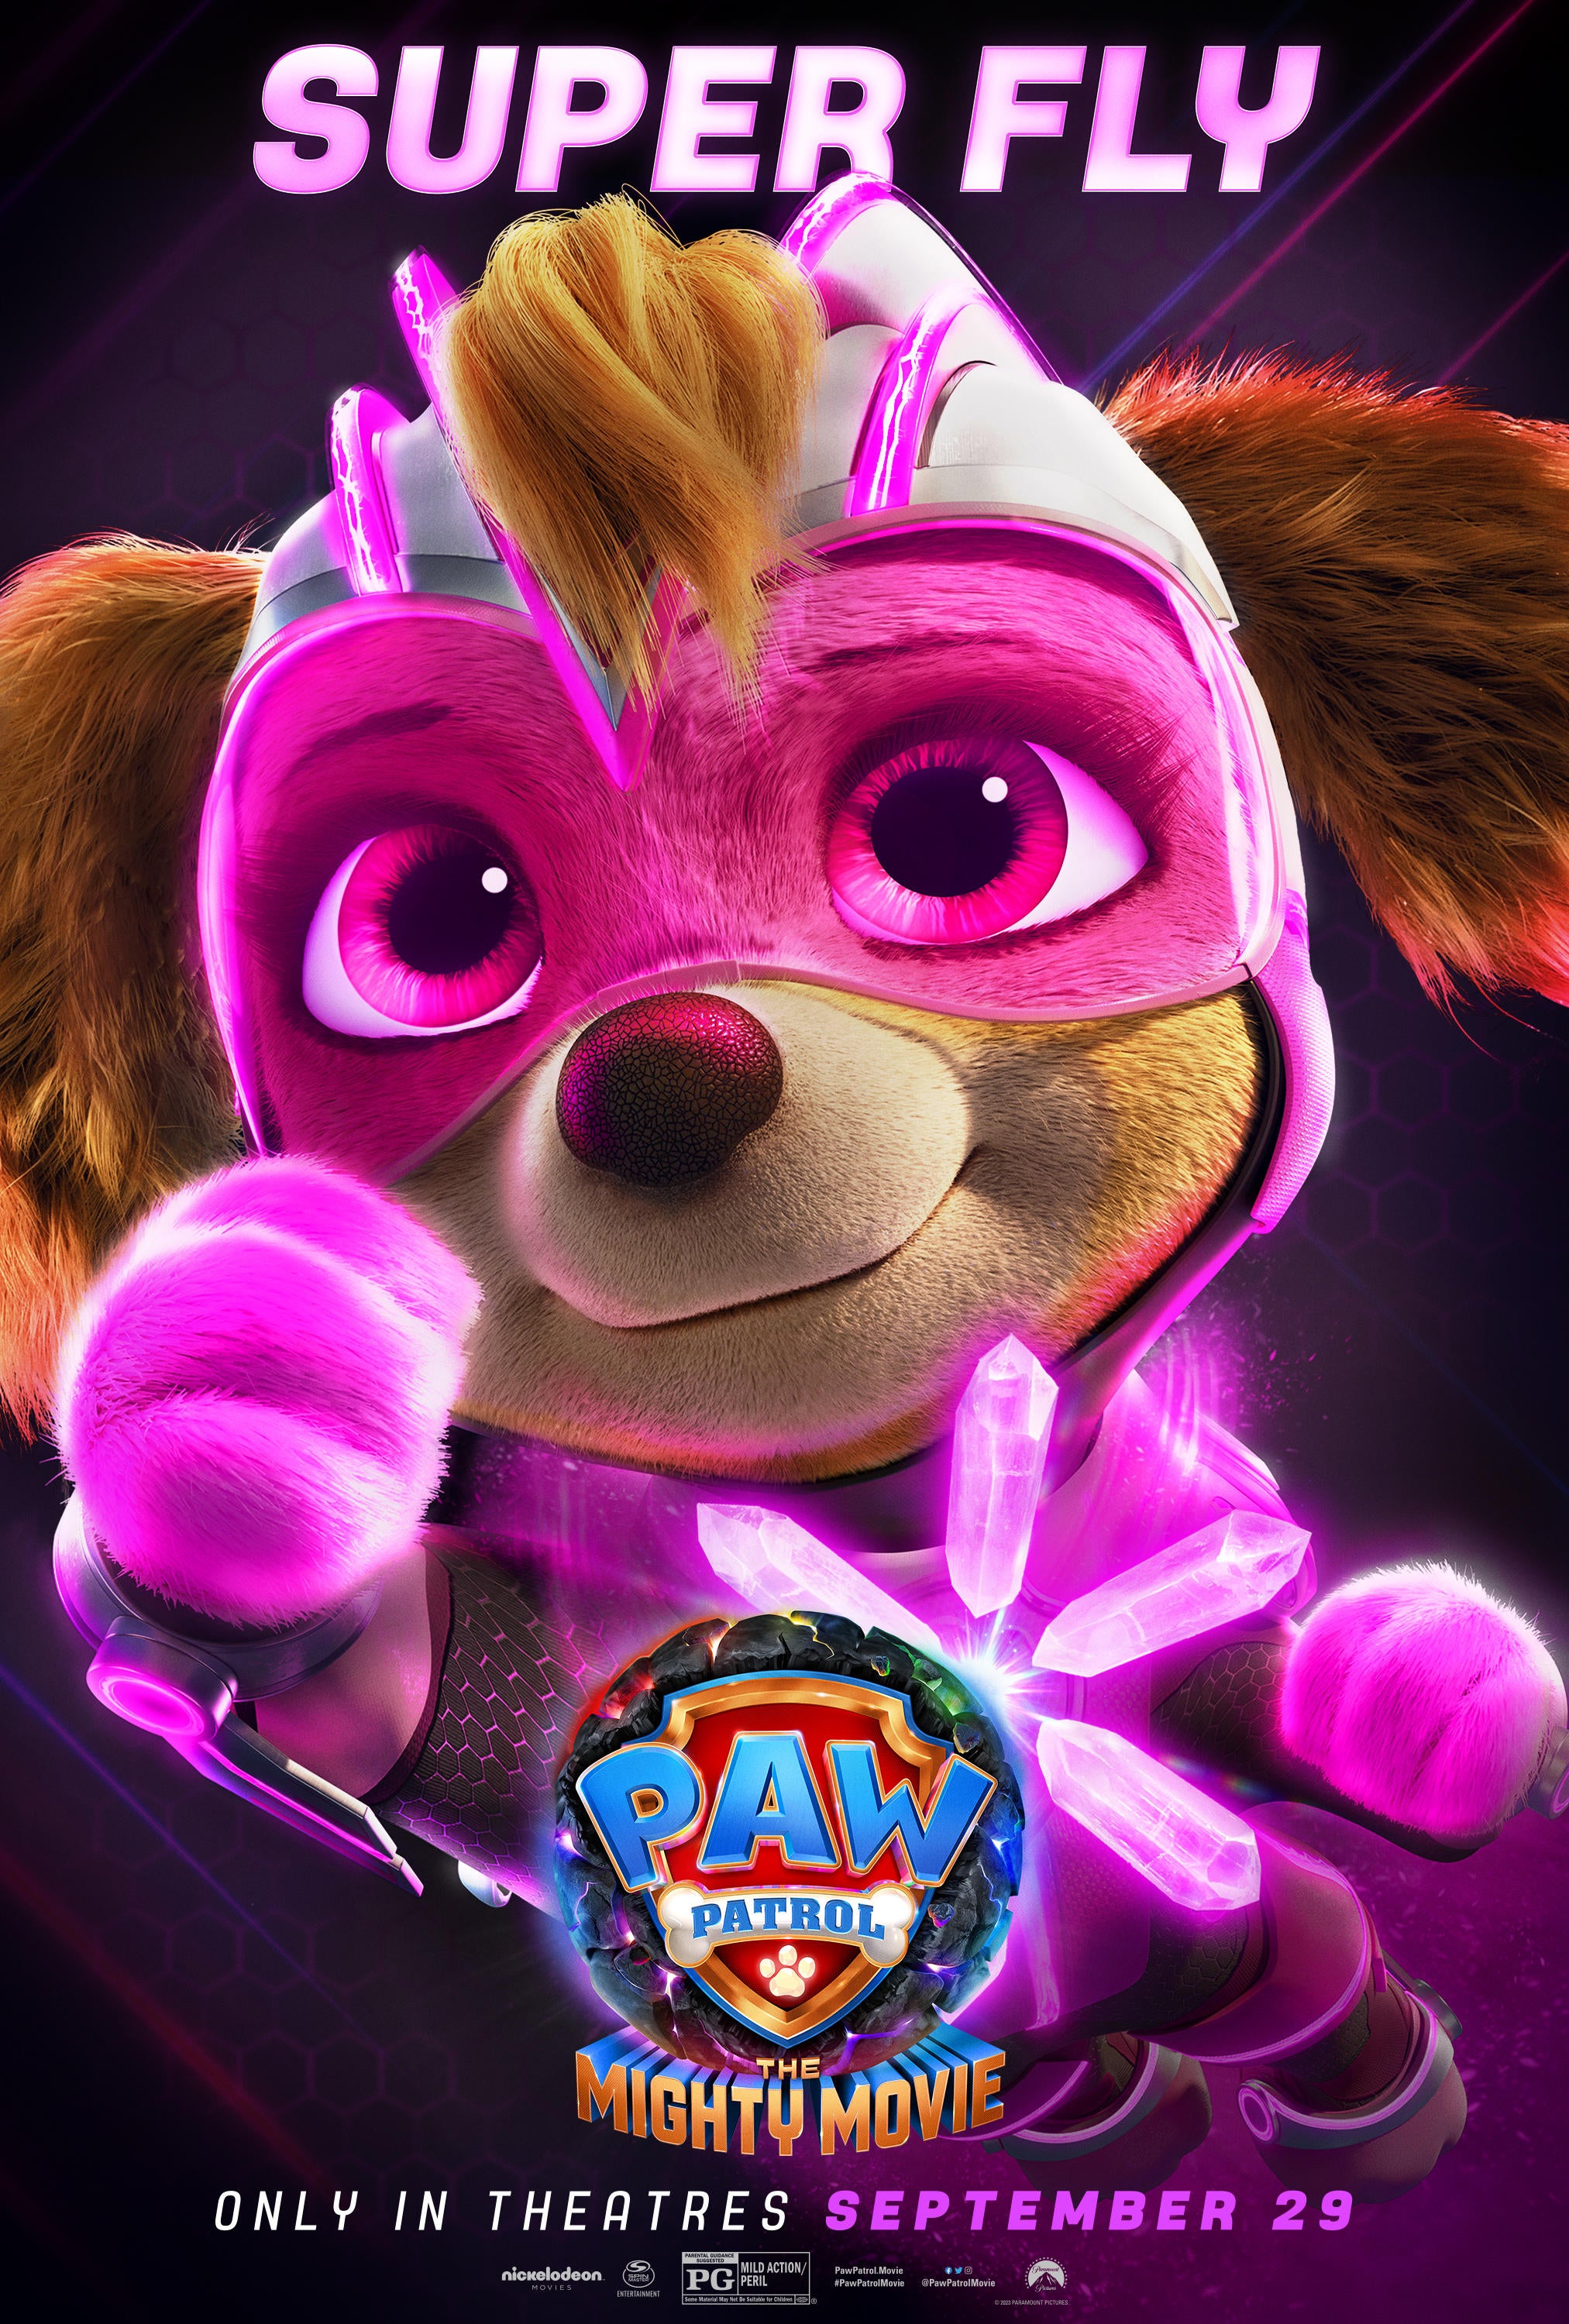 PAW Patrol: The Mighty Movie Character Posters: Skye